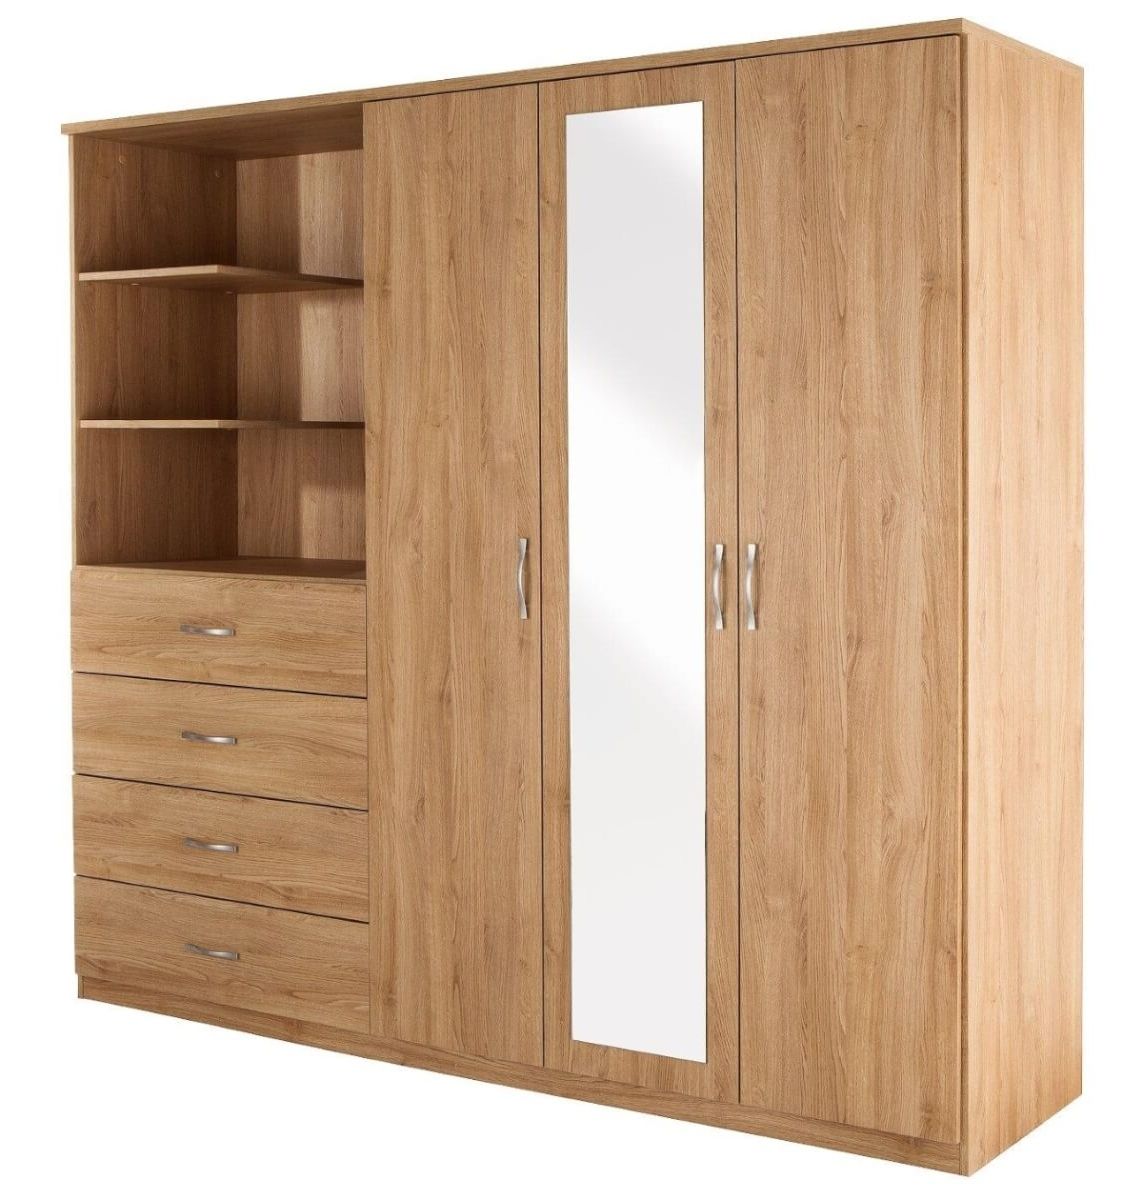 Most Popular Peru 2, 3 And 4 Door Combination Wardrobes And A Single Door Throughout 3 Door Wardrobes With Drawers And Shelves (View 1 of 15)